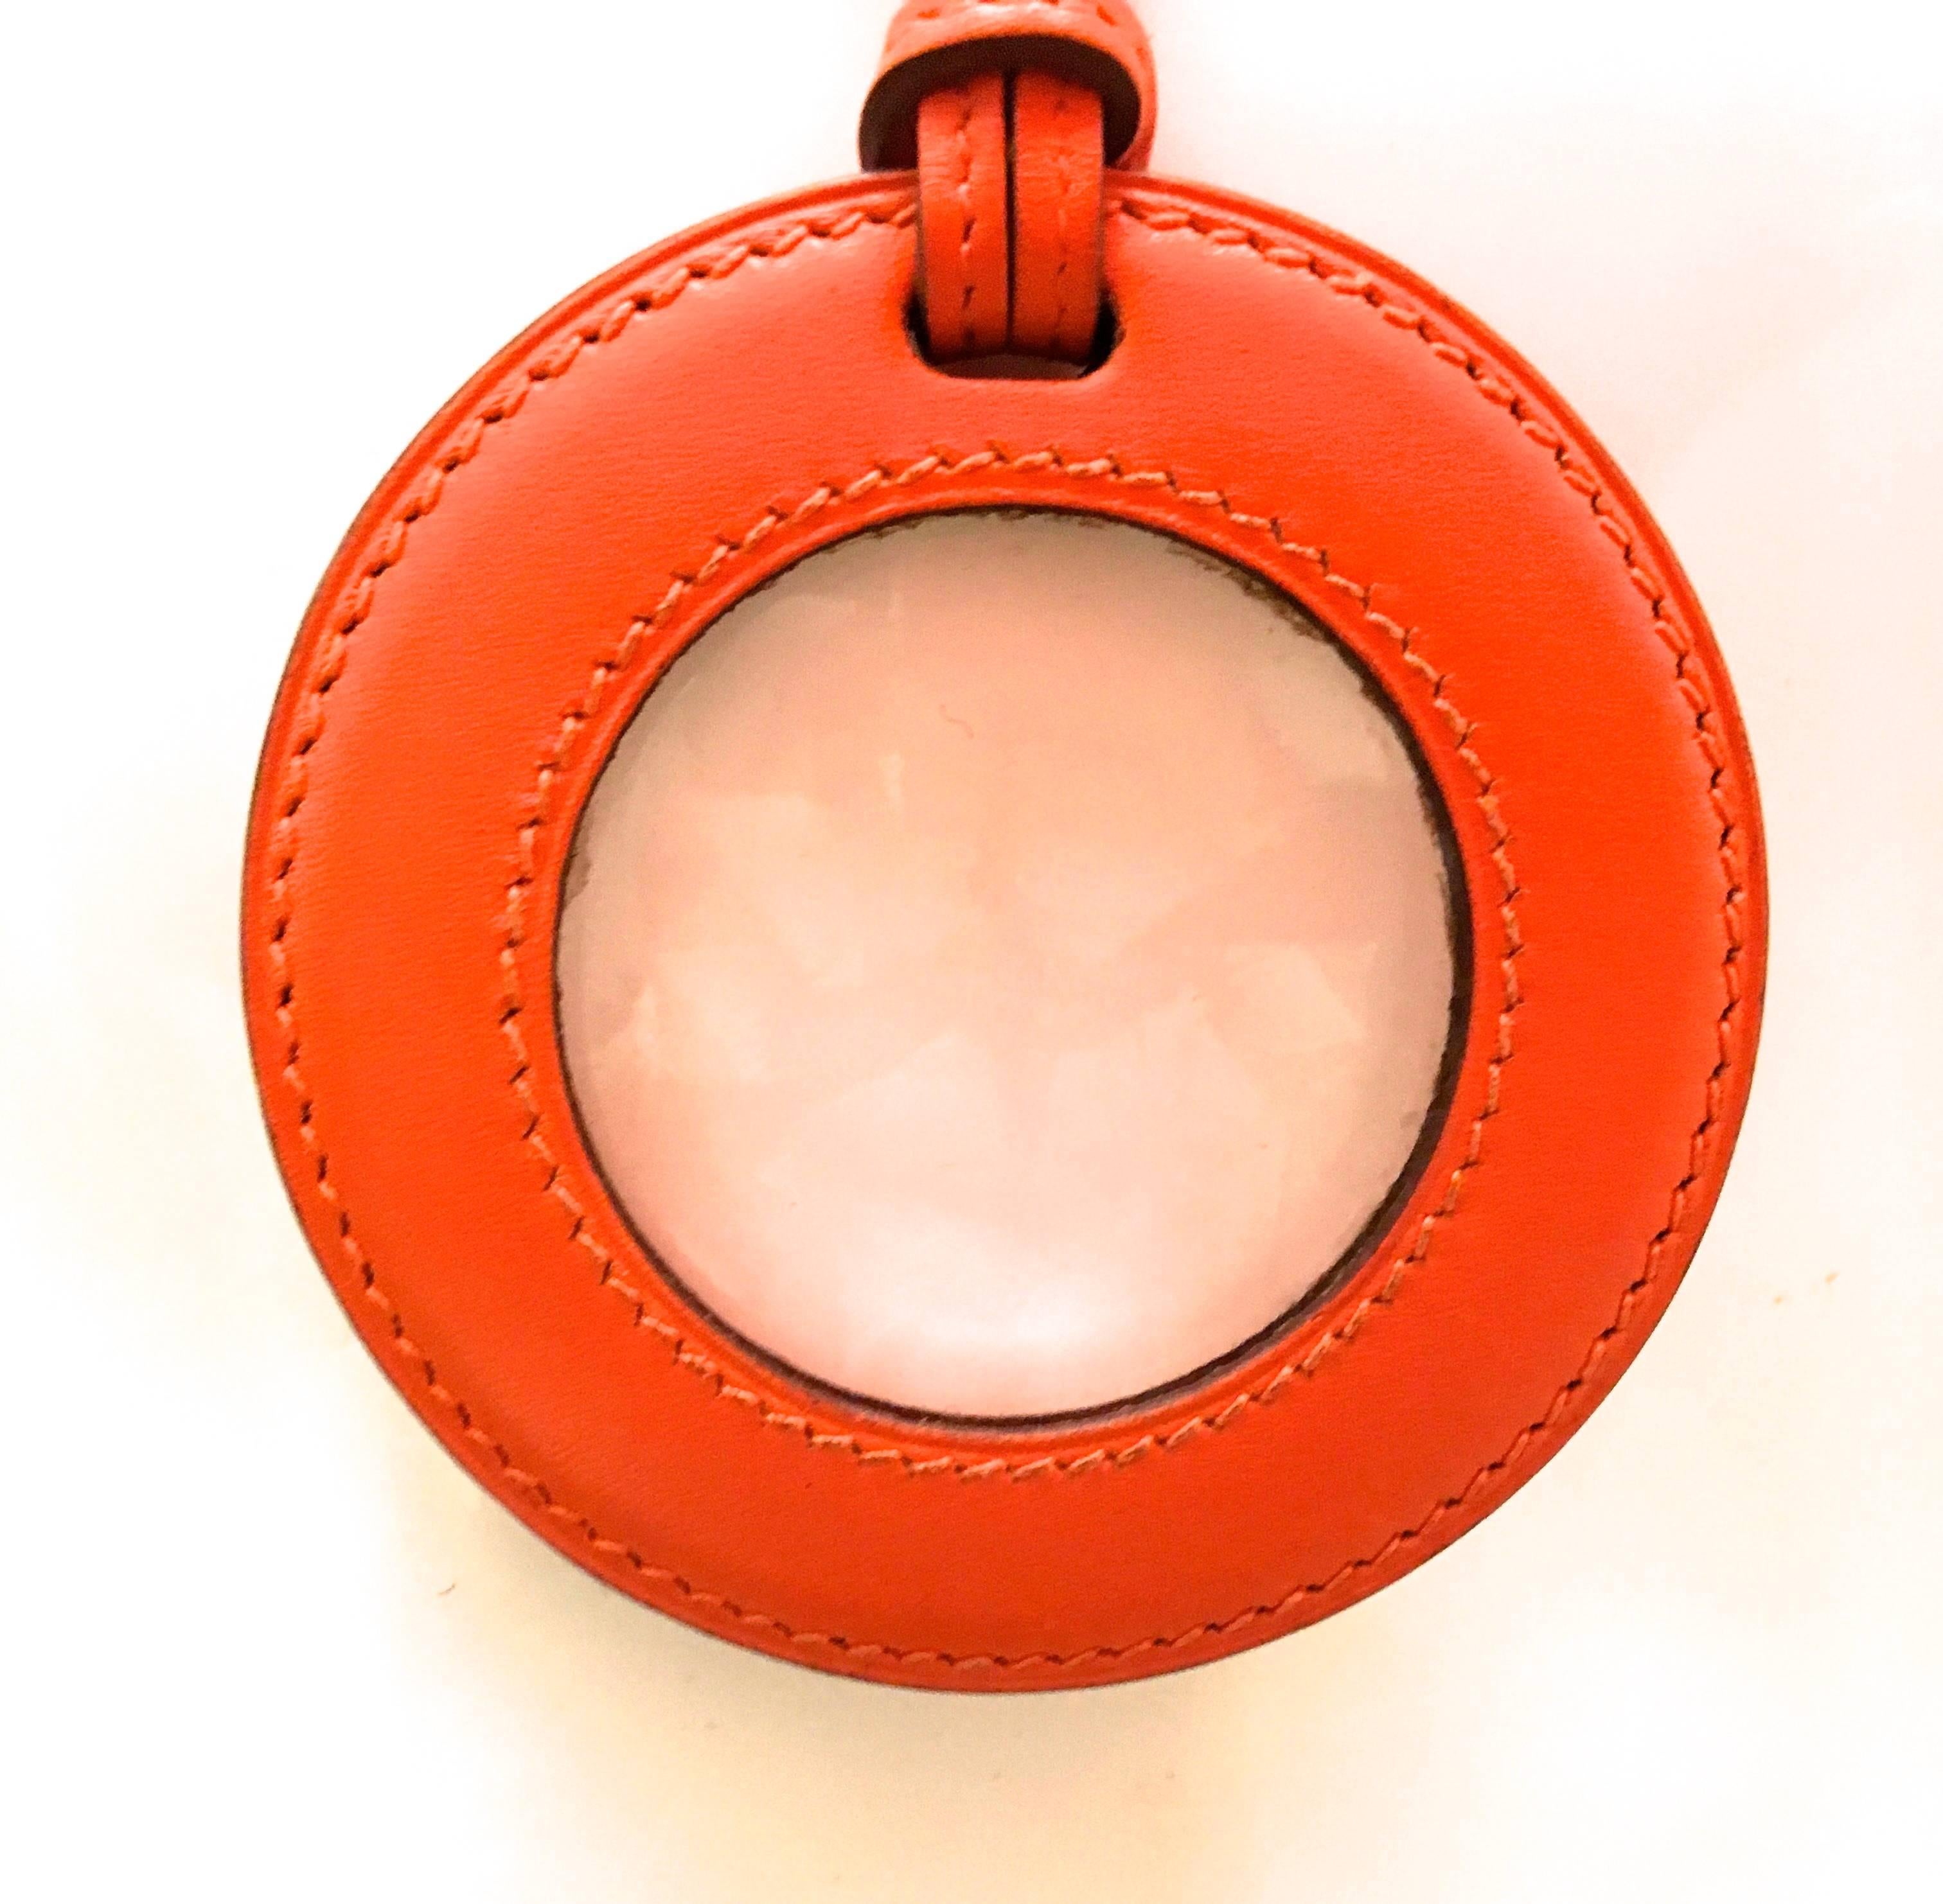 Presented here is a pendant necklace and magnifying glass (loop) from Hermes Paris. The necklace is an orange leather cord attached to a circular leather case. Within the case is a glass magnifying lens. The necklace is both beautiful and functional